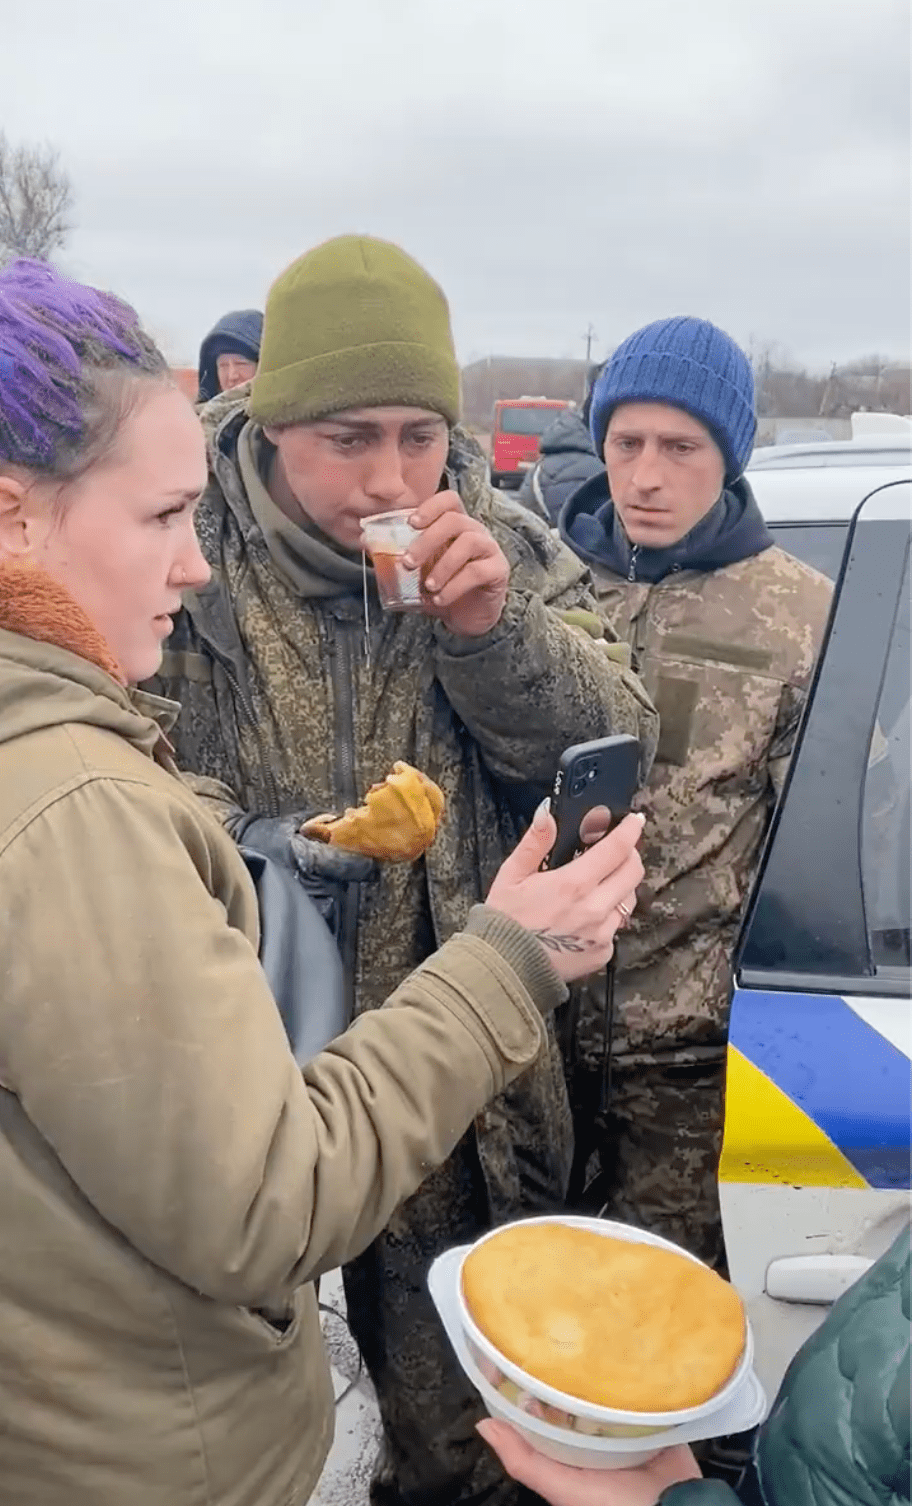 Russian soldier who surrendered moved to tears after ukrainians feed him and let him call his mother | weirdkaya